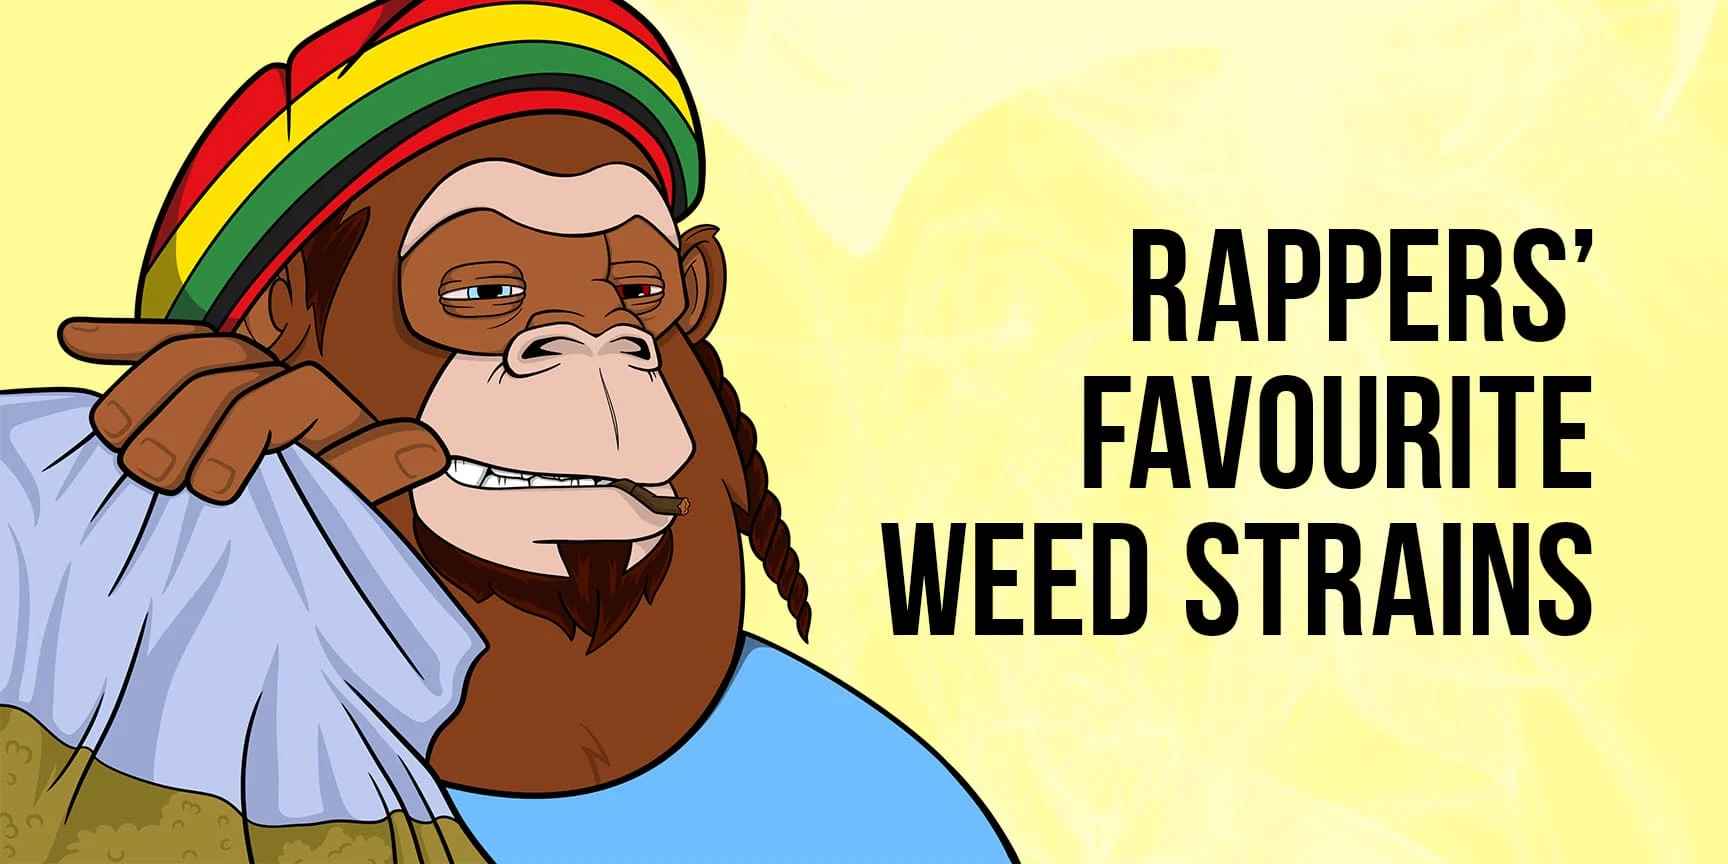 Ape looks like rapper and lettering "Rappers' favourite Weed strain"